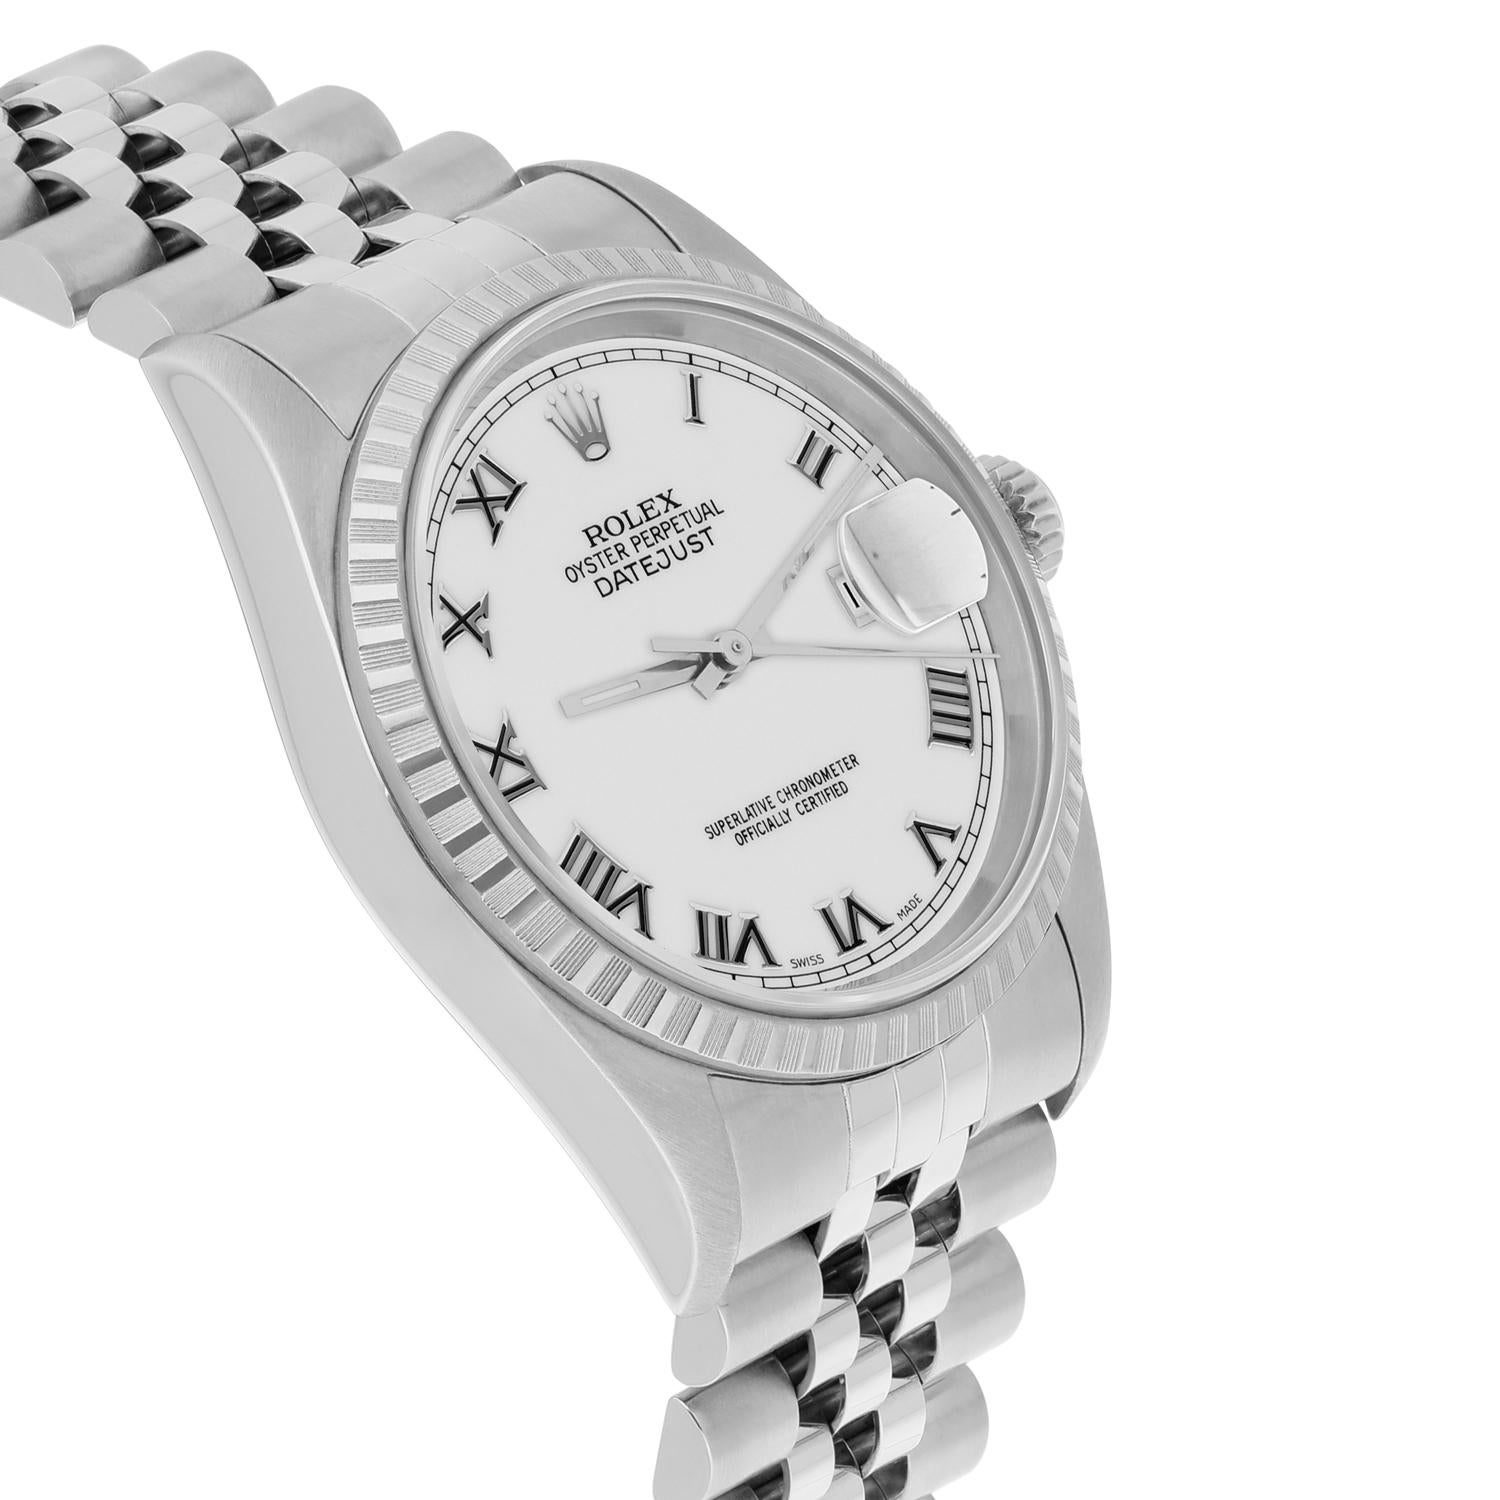 Women's or Men's Rolex Datejust 36mm Stainless Steel Watch White Roman Dial 16220 Circa 2000 For Sale